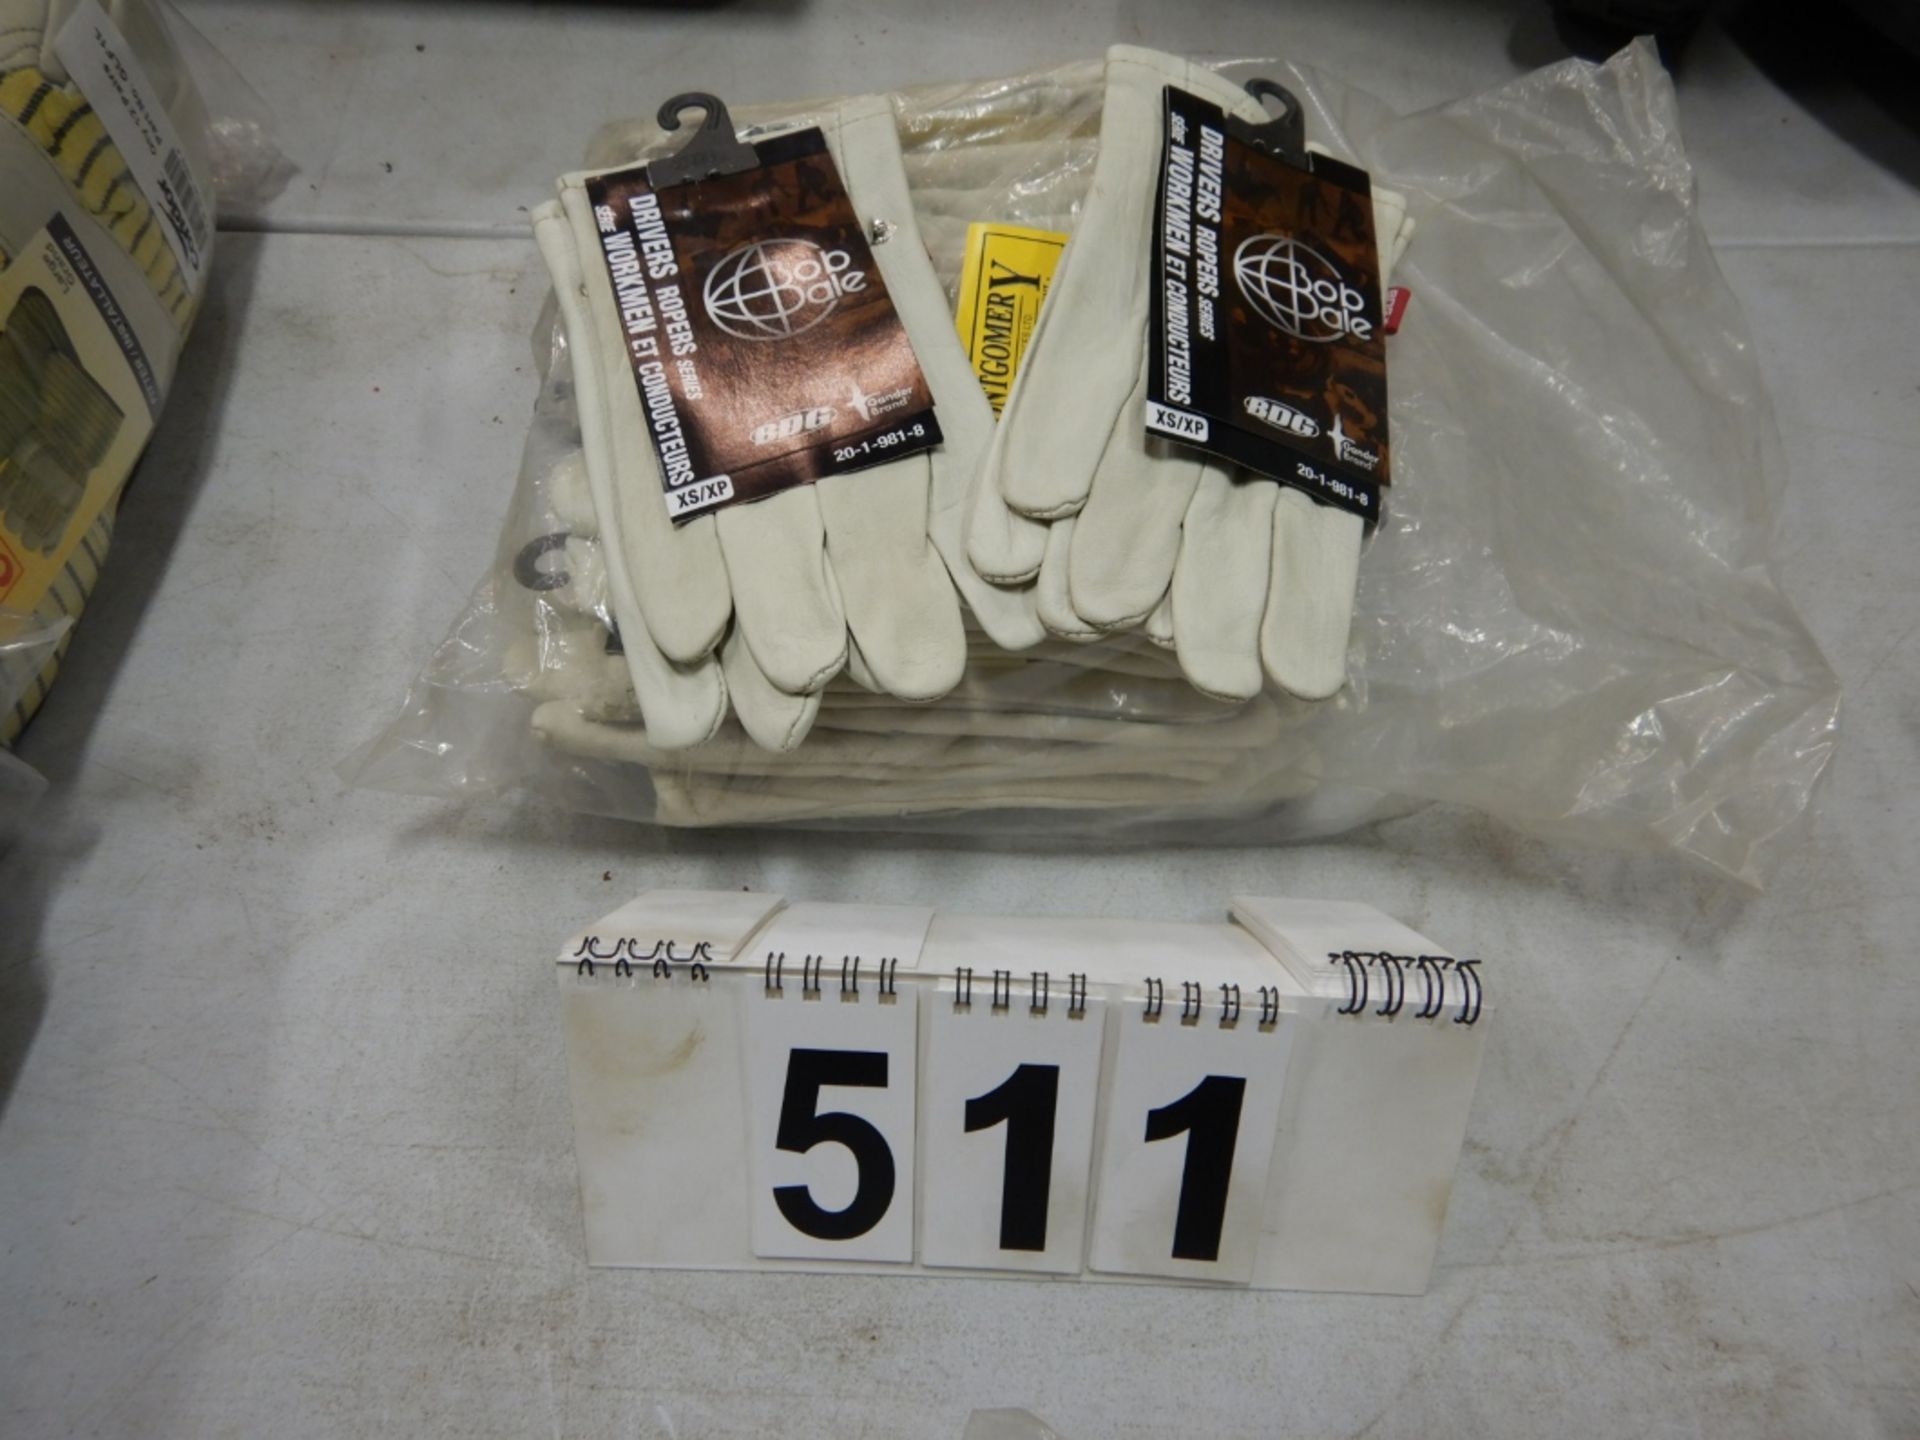 L/O BOB DALE DRIVERS ROPERS SERIED GLOVES, SIZE XS